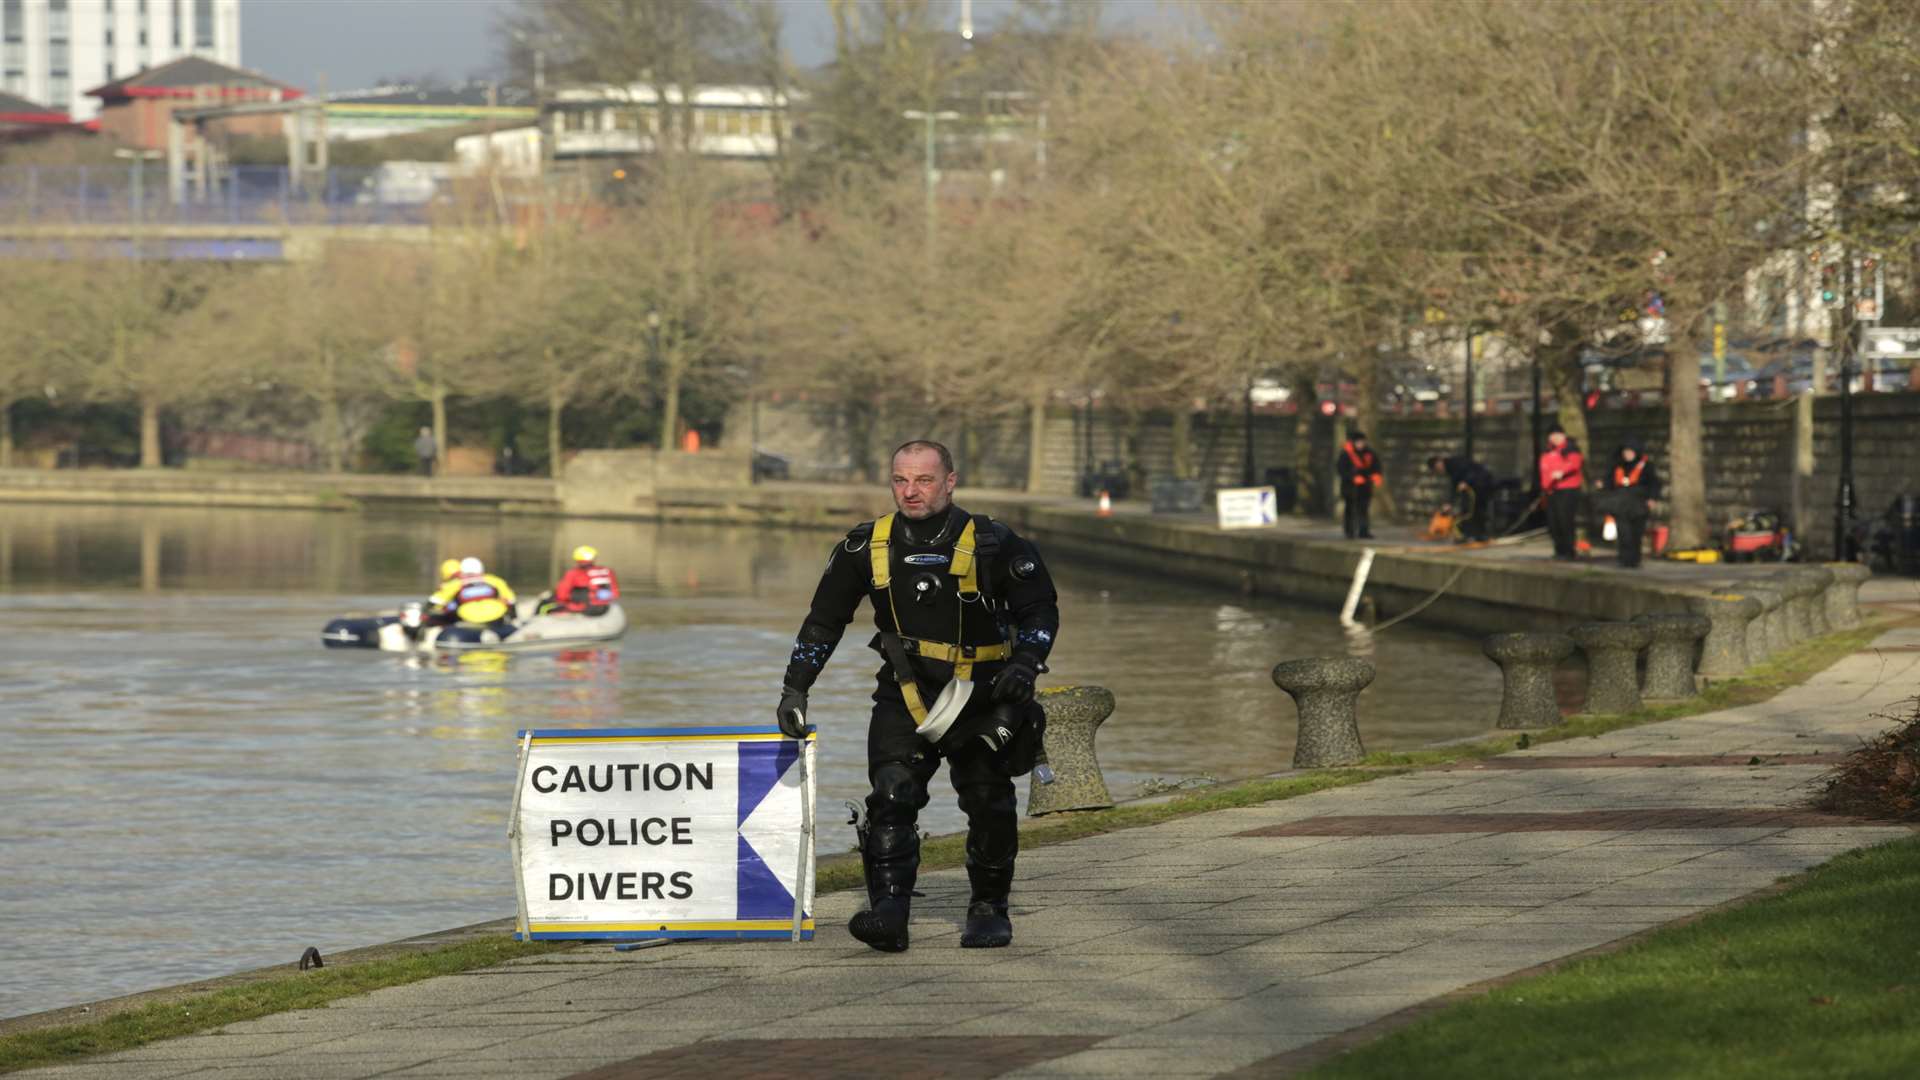 The scene at the River Medway as police divers conduct a search for Pat Lamb